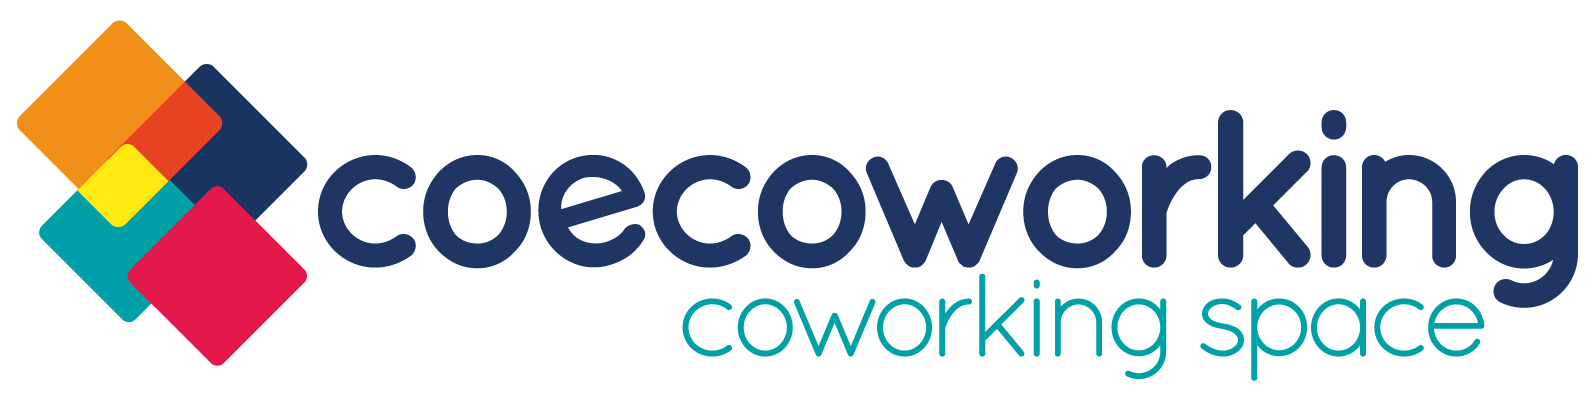 Coworking Space Logo - Coecoworking - Coworking Space | Your coworking space in Medellín